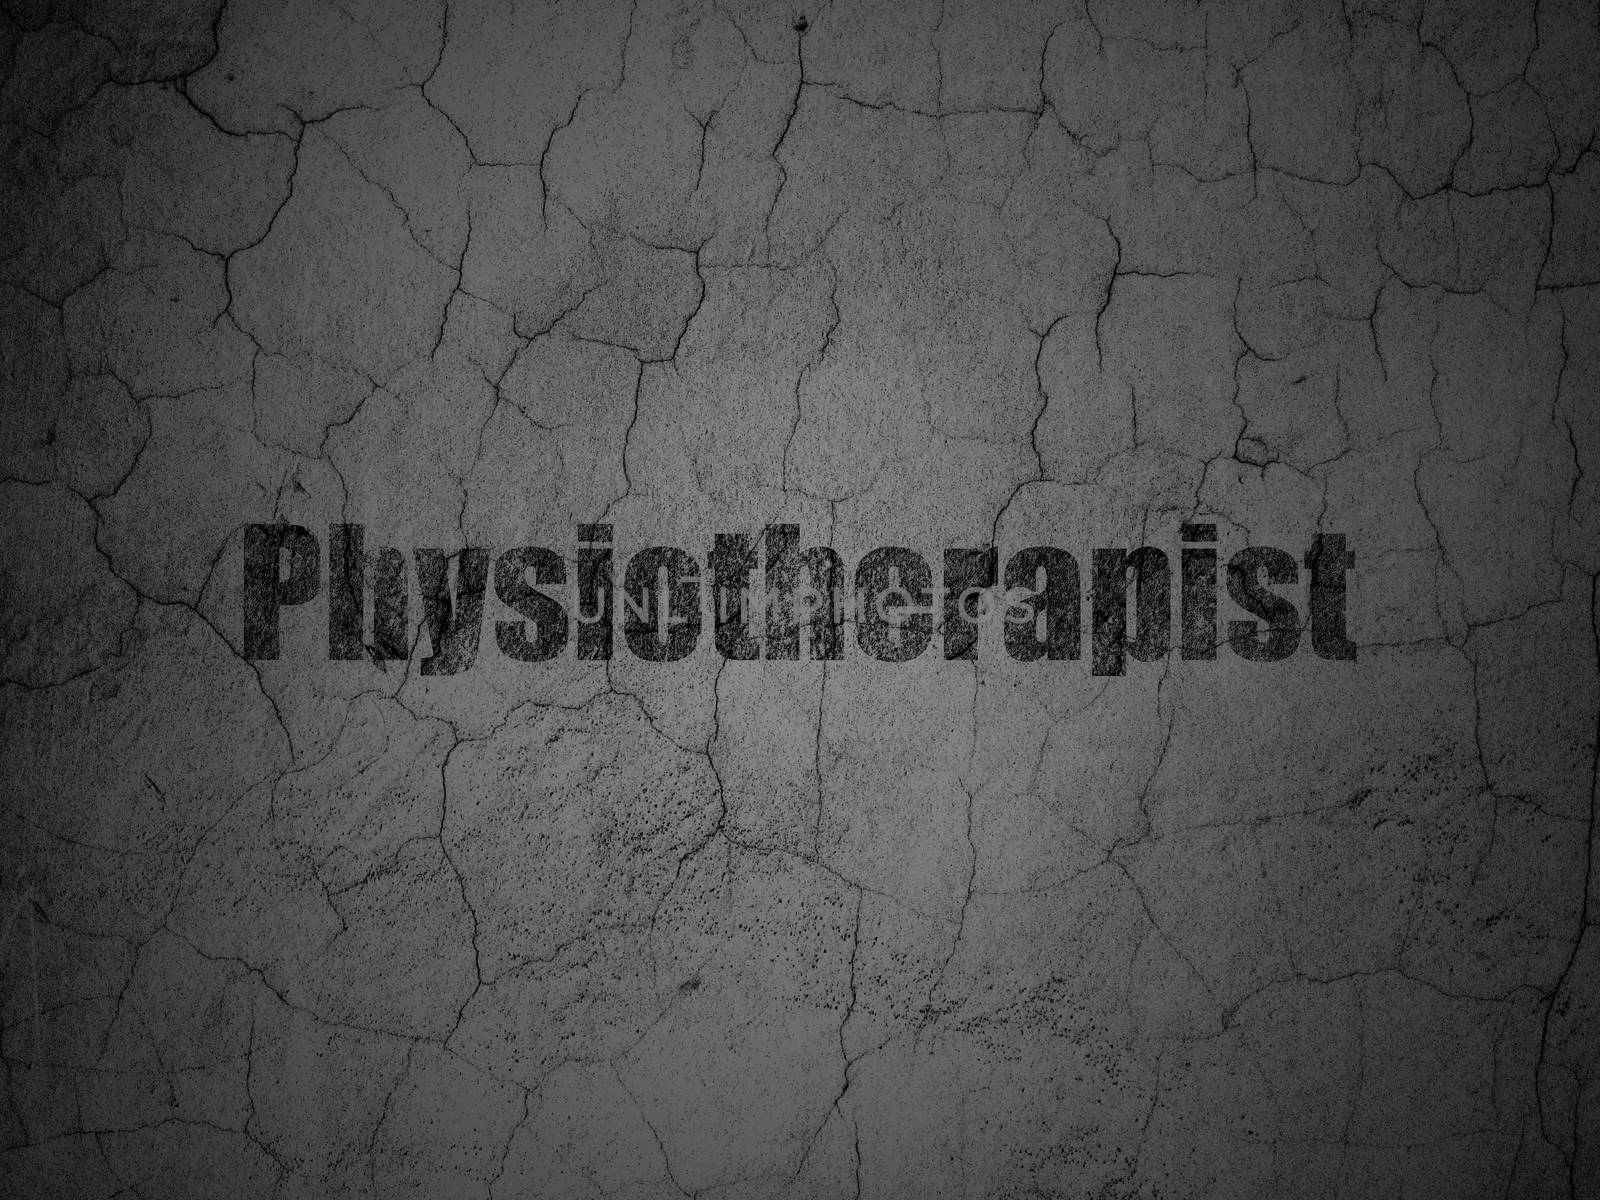 Medicine concept: Black Physiotherapist on grunge textured concrete wall background